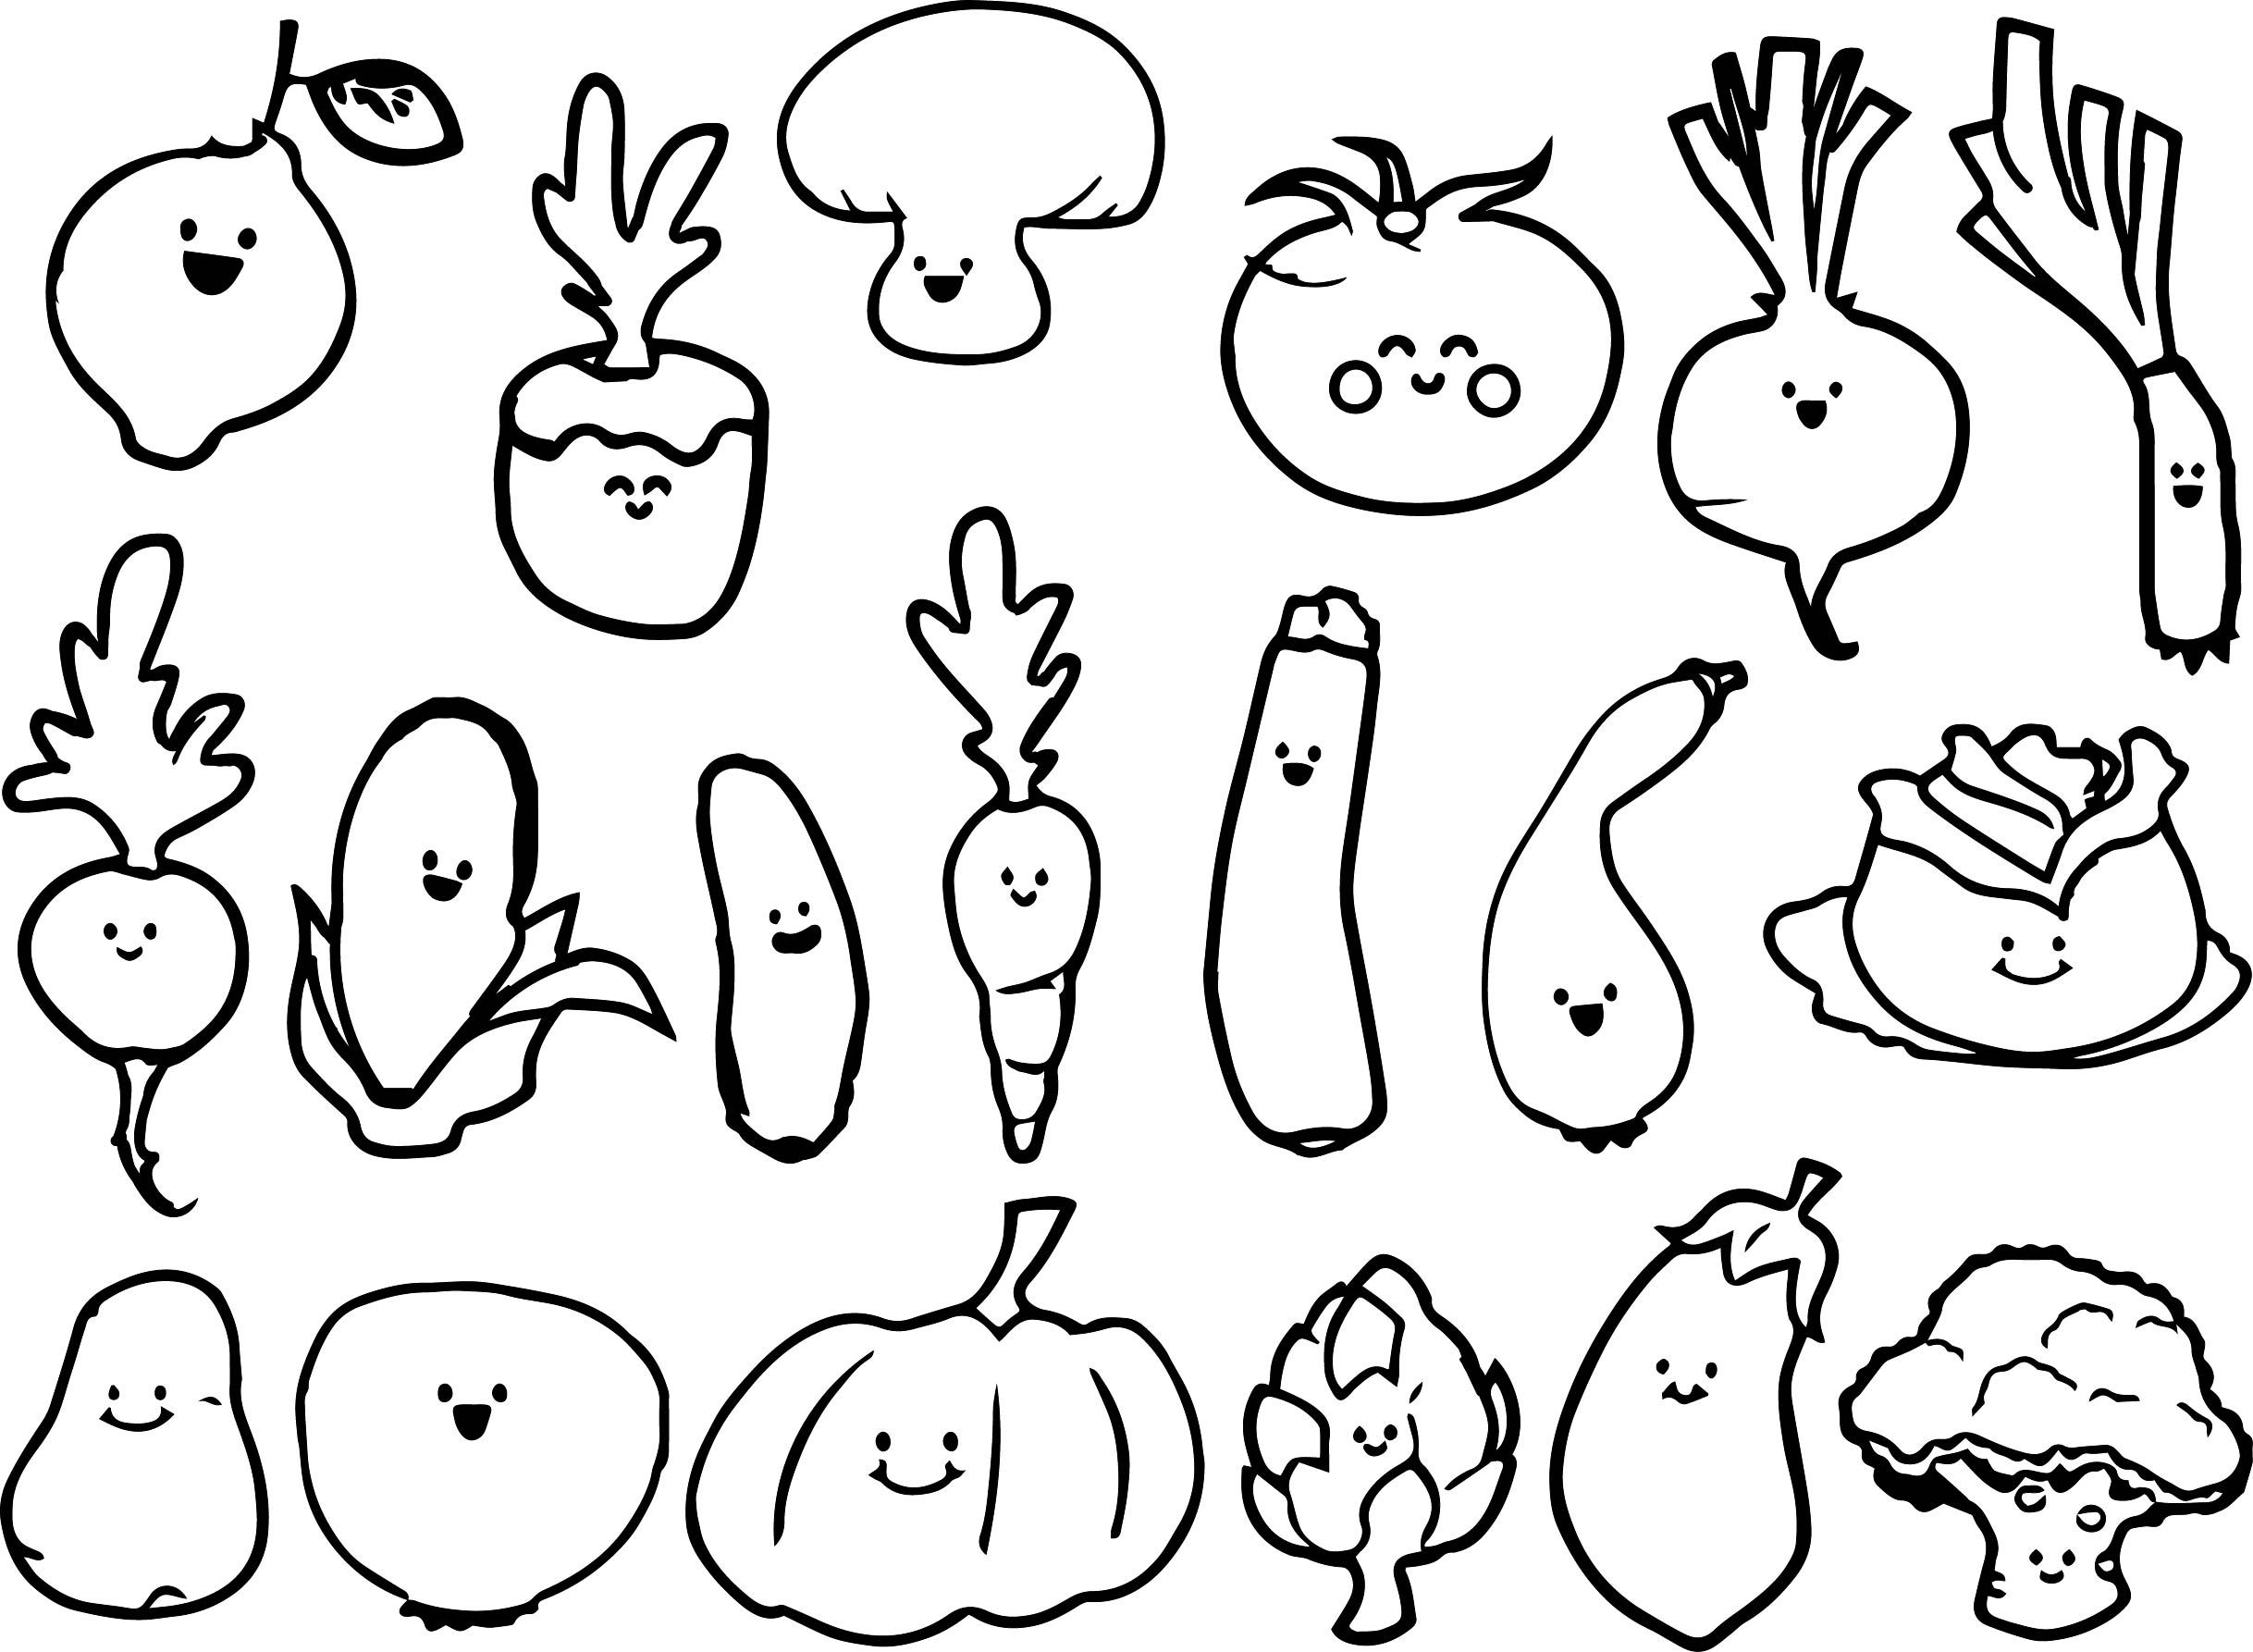 fruits and vegetables coloring book image result for cute food drawings black and white coloring book and vegetables fruits 